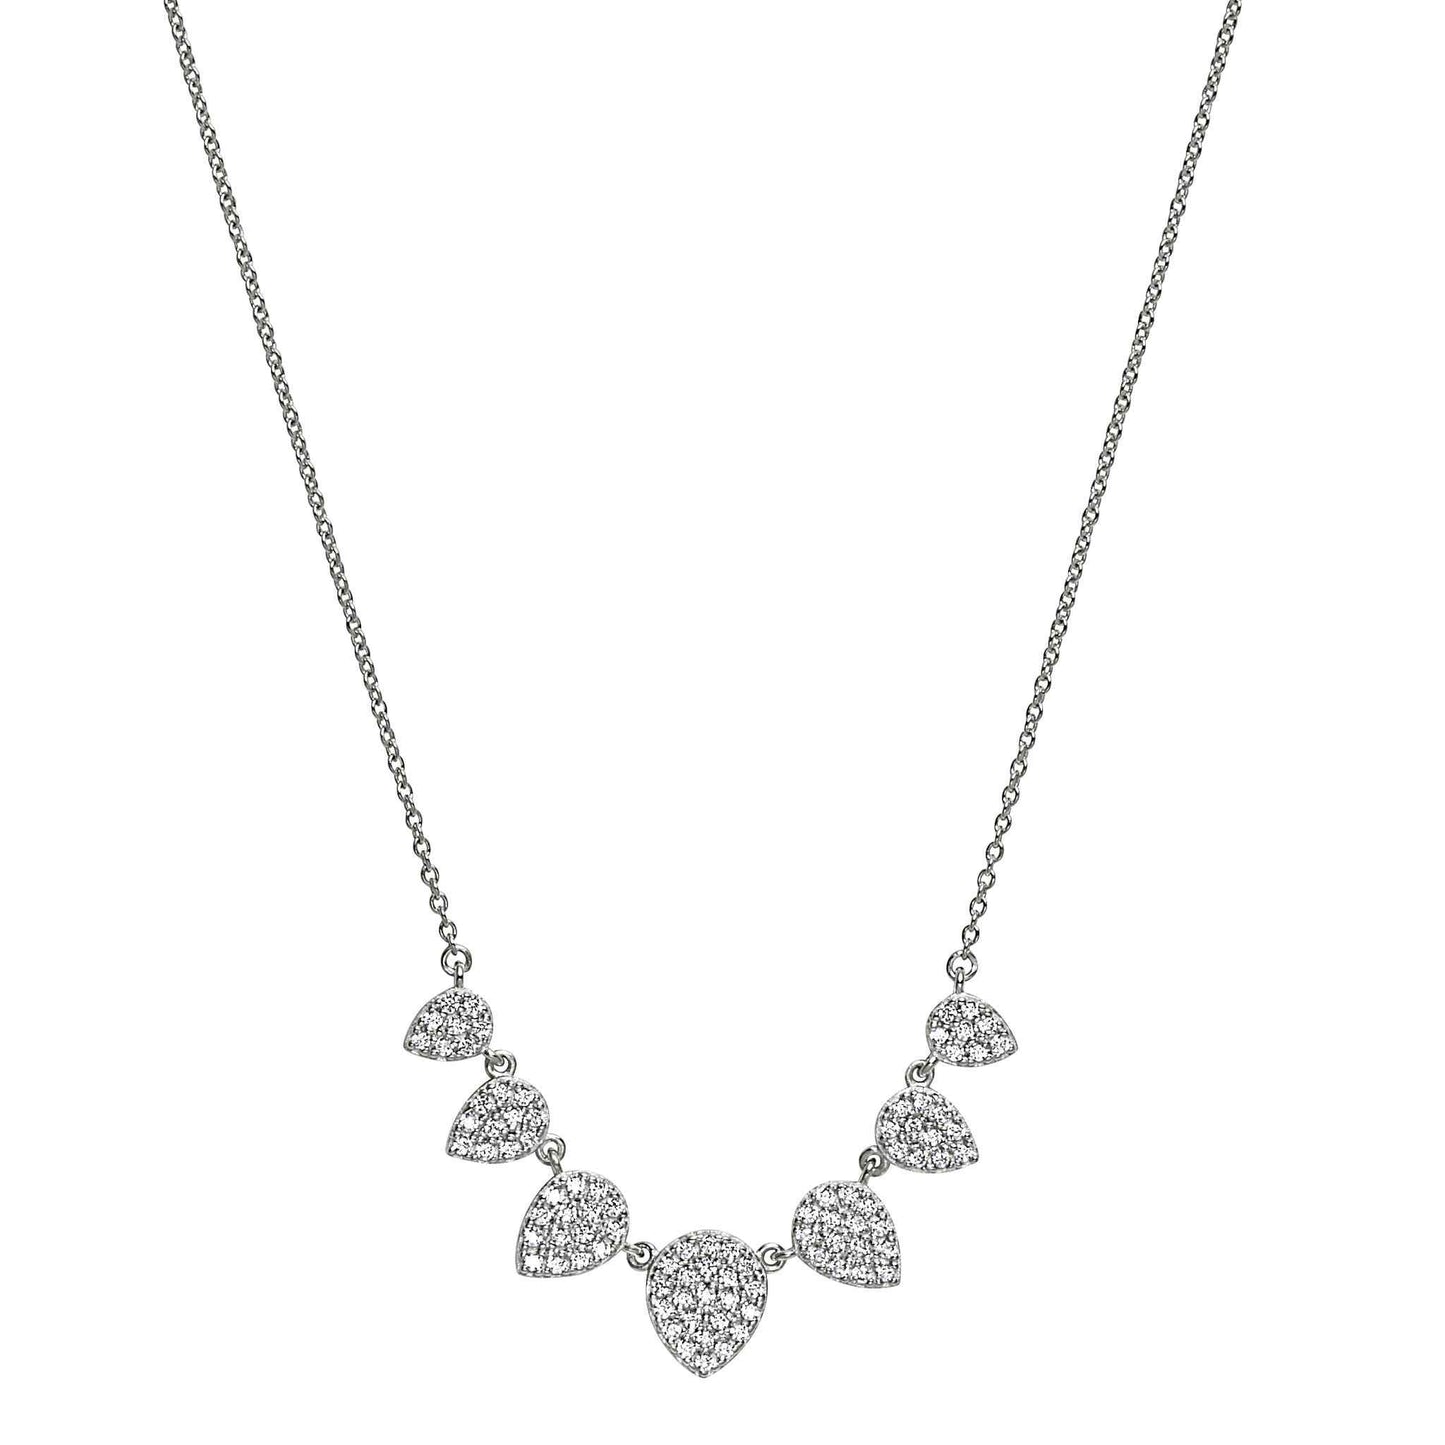 A leaves necklace with simulated diamonds displayed on a neutral white background.